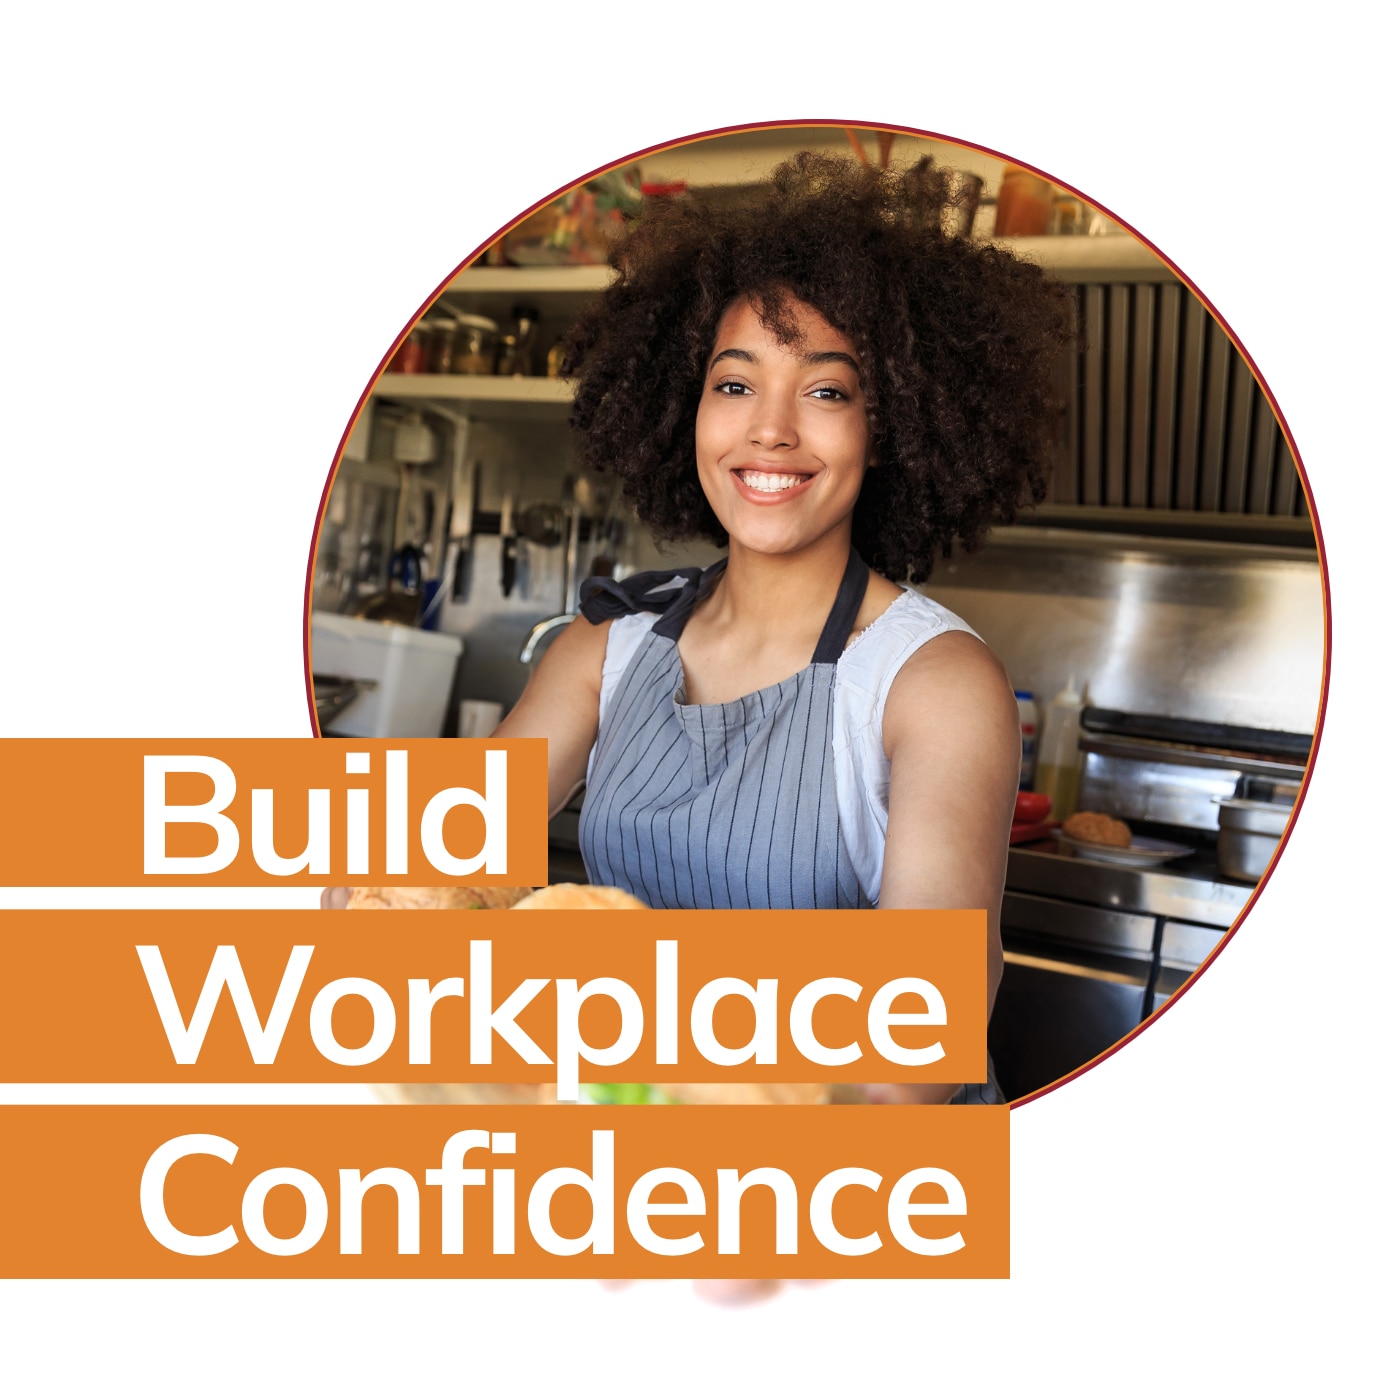 Skills for Success: Build Workplace Confidence